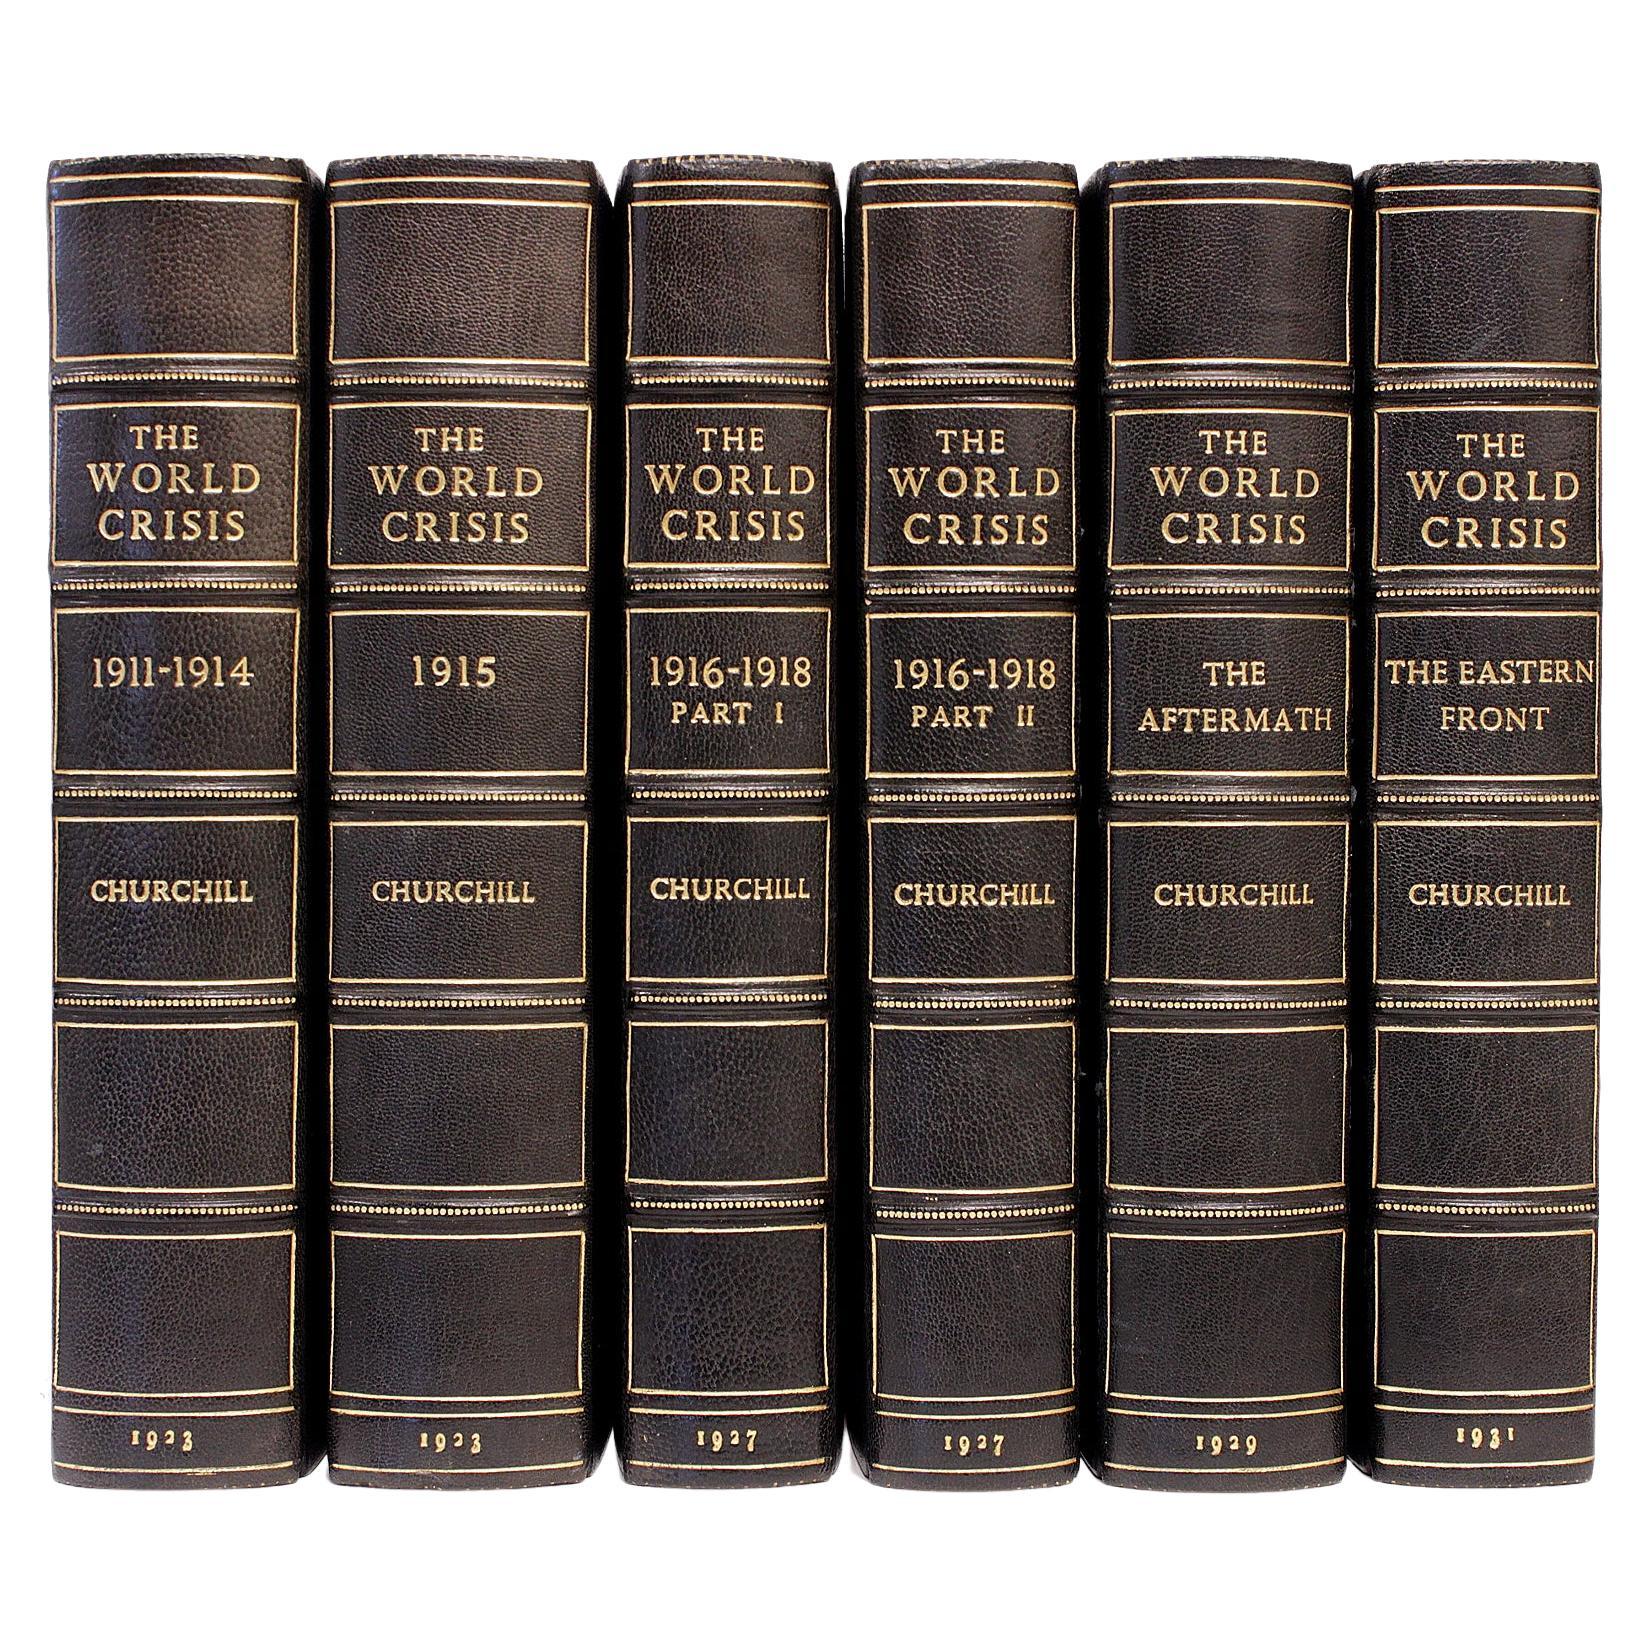 Winston CHURCHILL. The World Crisis - 6 Bände. ALL FIRST EDITIONS 1923-1931 im Angebot